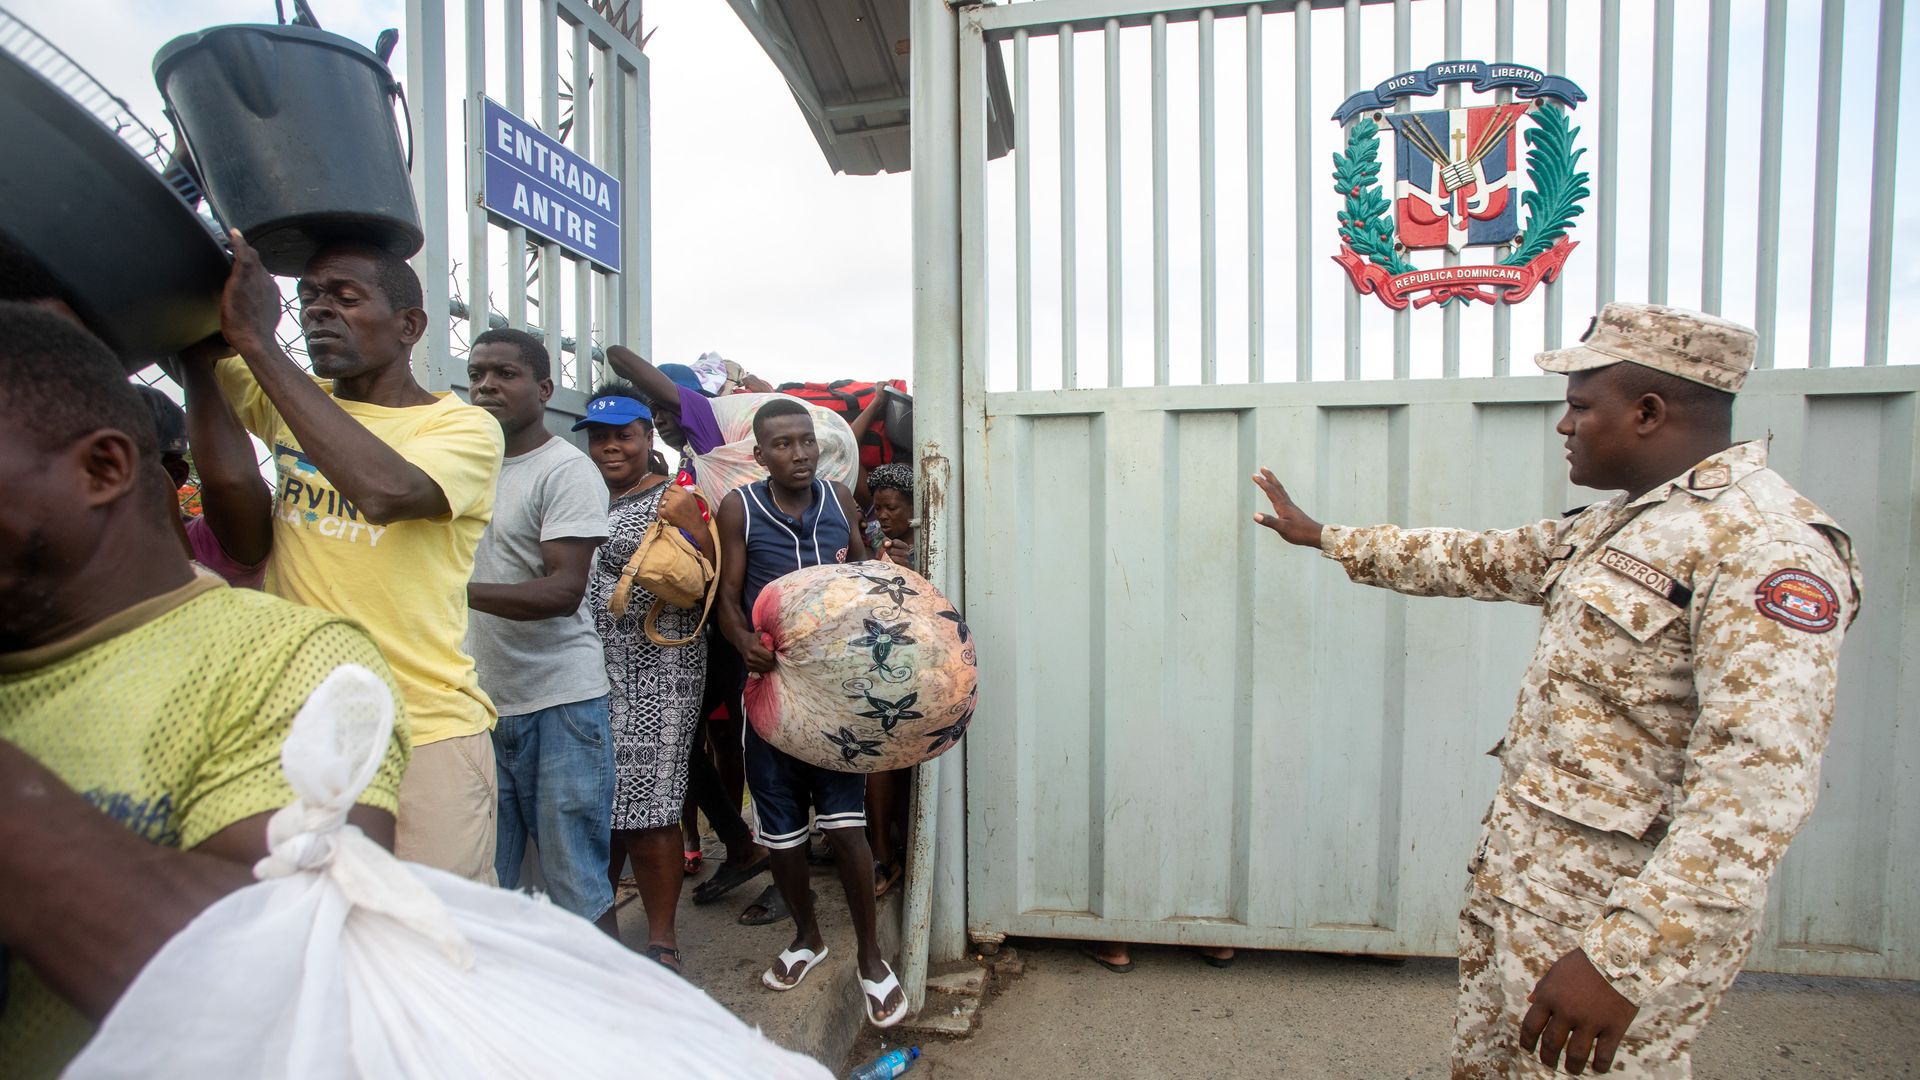 A member of the Specialized Border Security Corps (Cesfront) directs pedestrians arriving from Haiti at the Dajabon and Ouanaminthe border bridge entry gate in Dajabon, Dominican Republic.